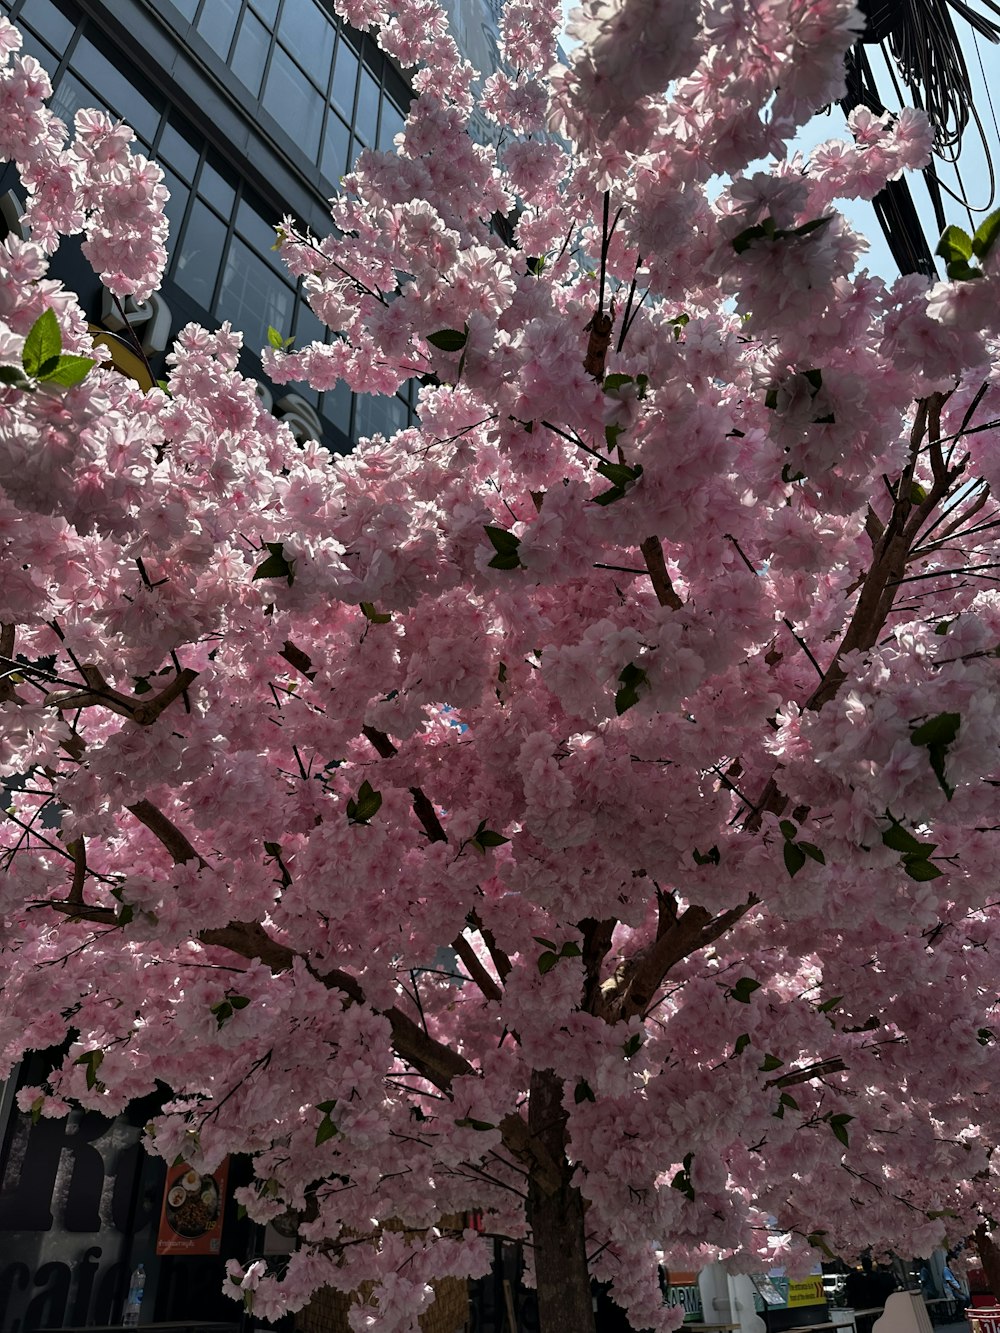 a tree with pink flowers in front of a tall building